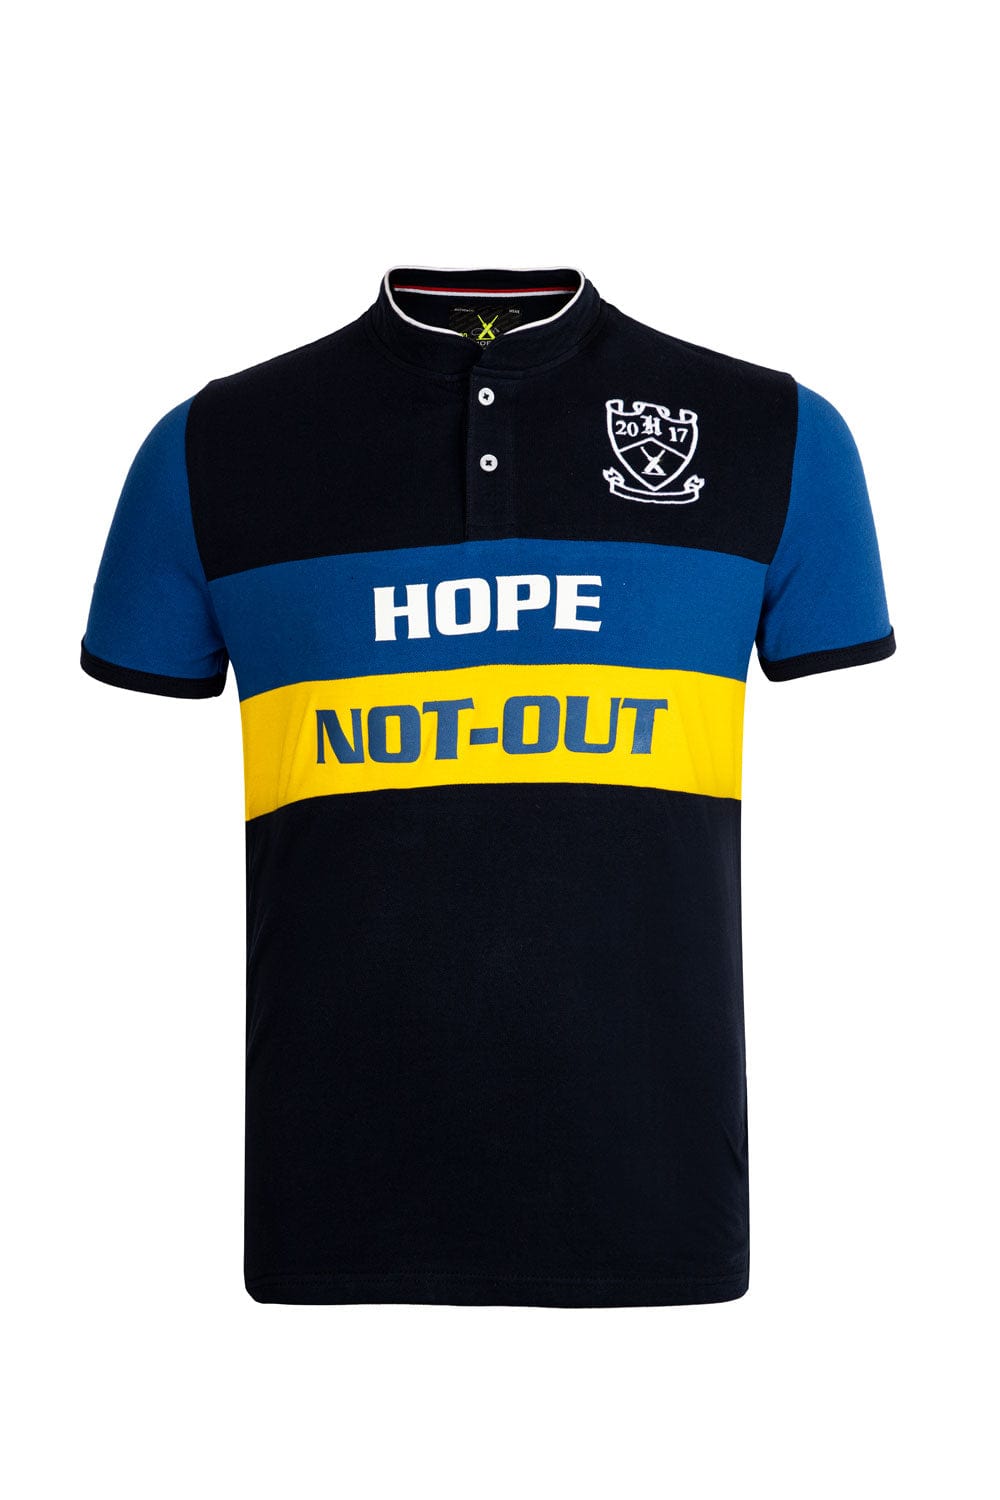 Hope Not Out by Shahid Afridi Men Polo Shirt Multi Polo Cut & Sew Panel with Embroidery